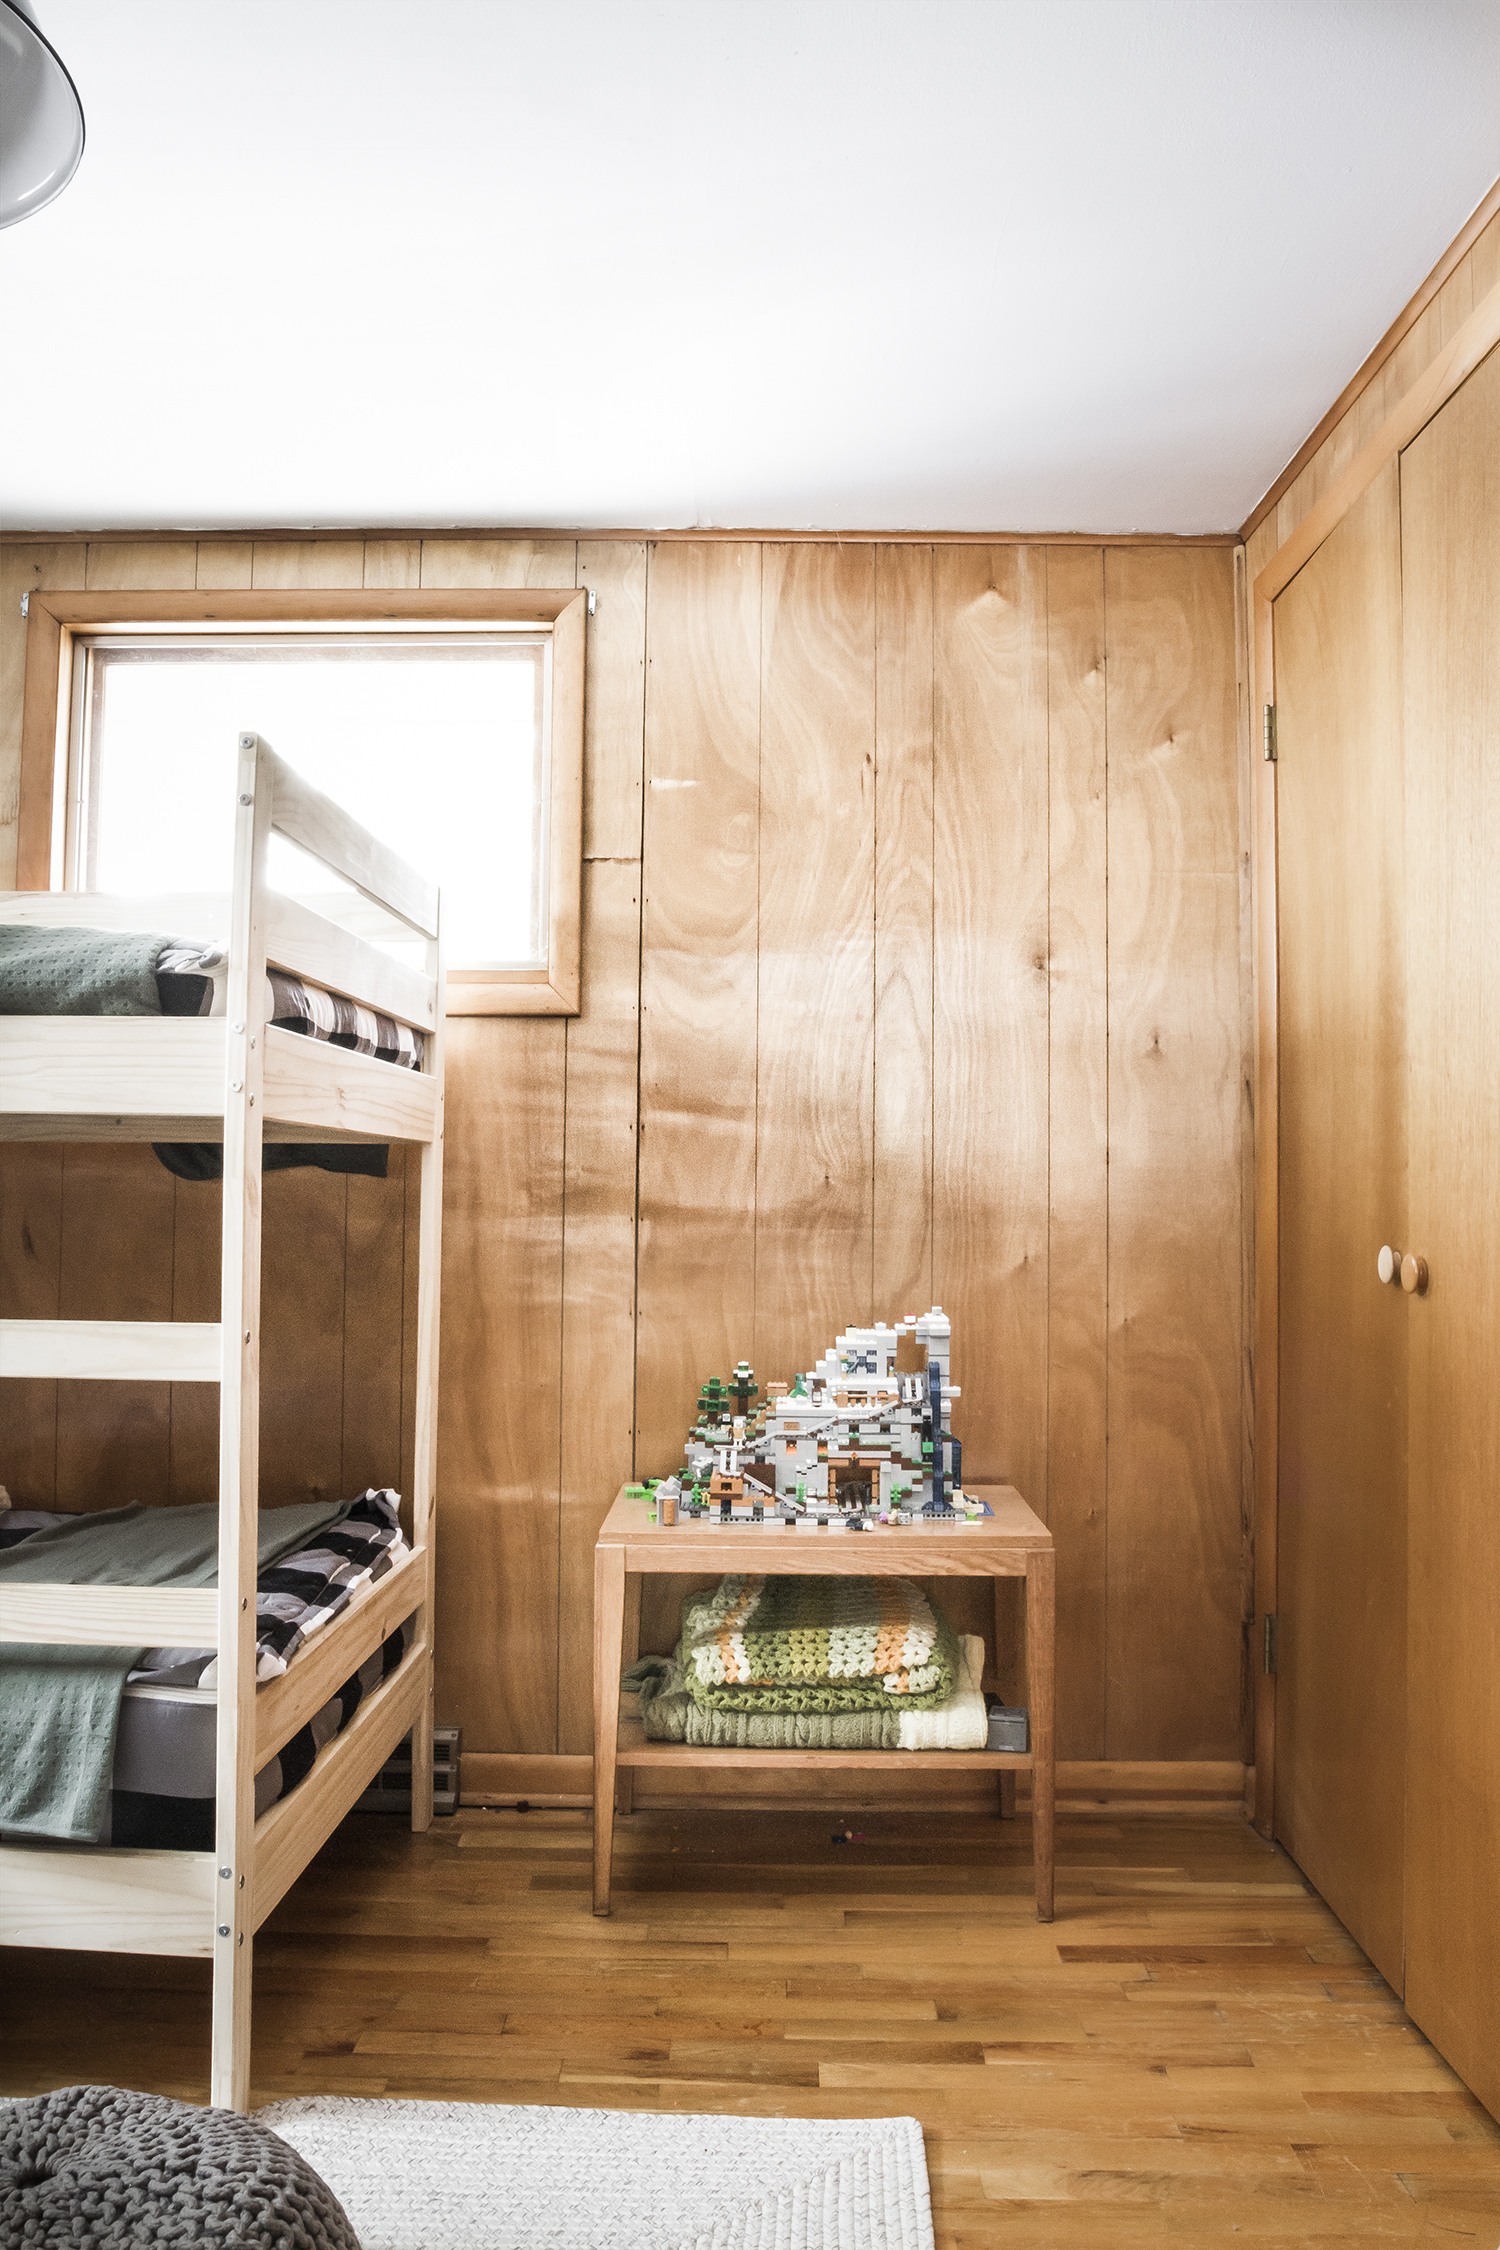 Cabin Bunk Room with Buffalo Check Beddy's